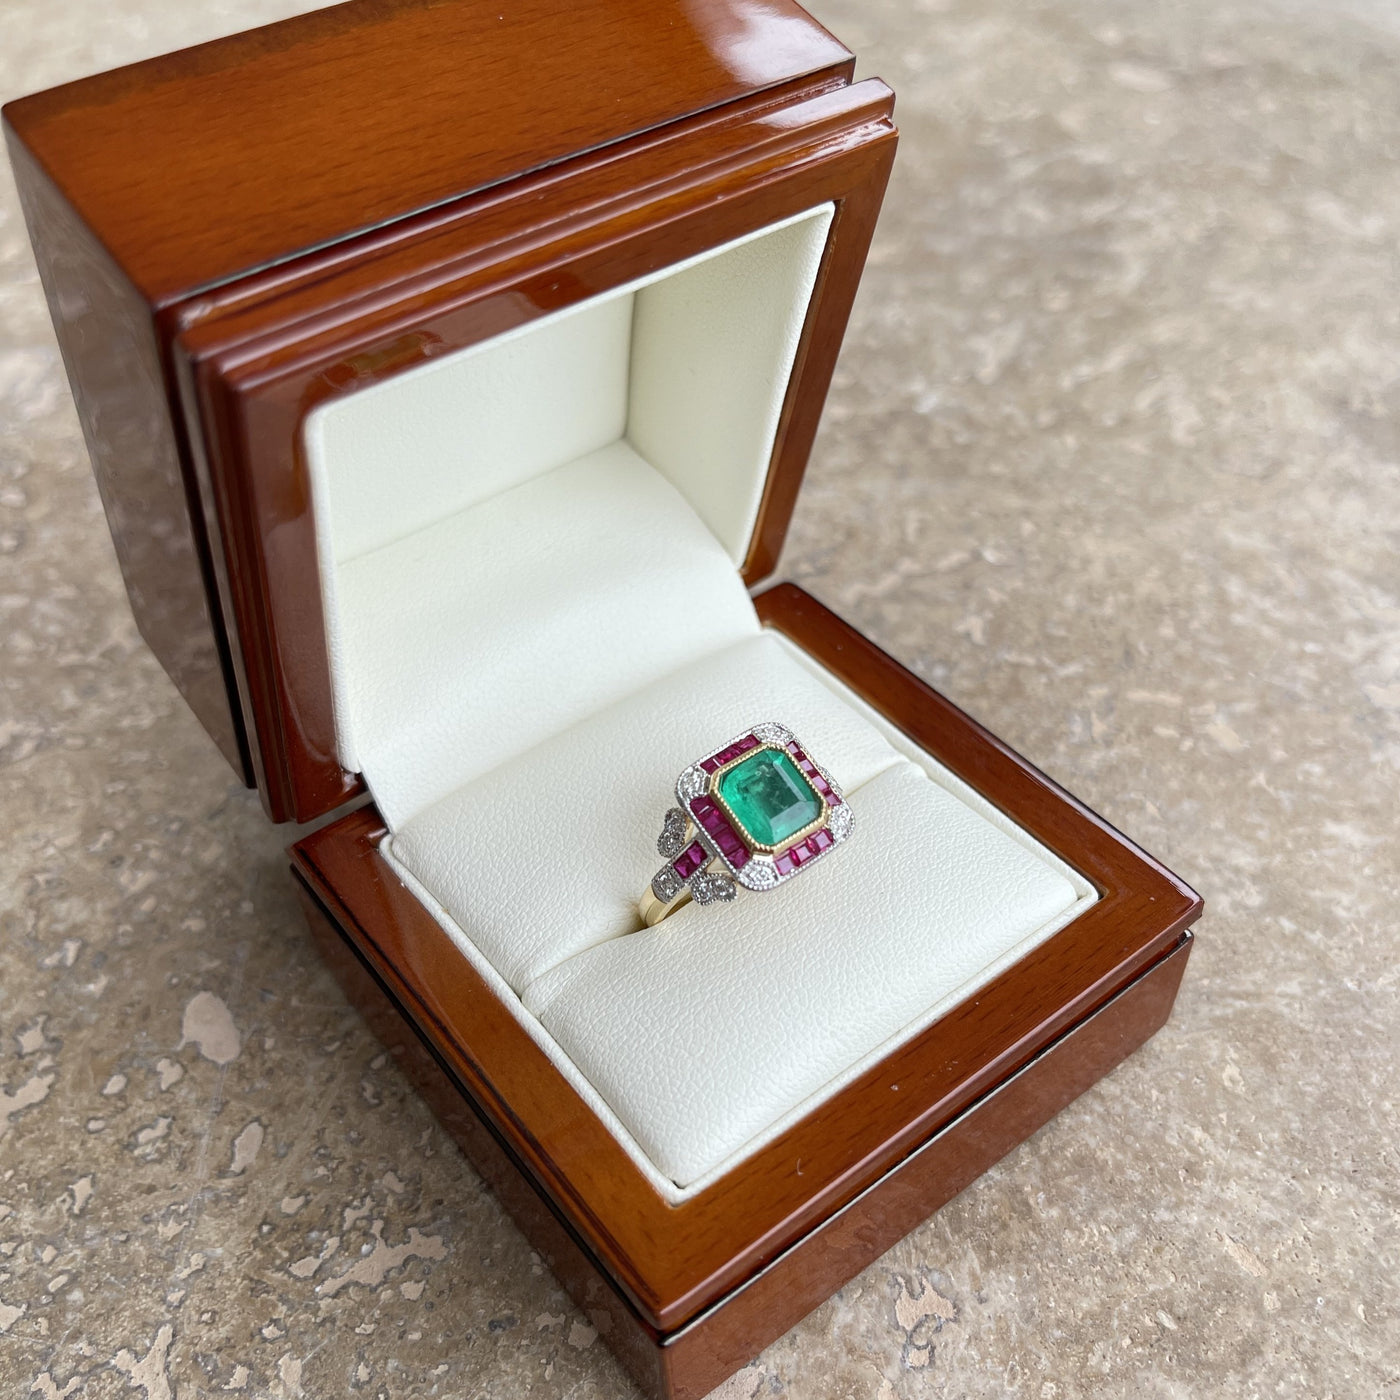 18CT Yellow Gold Colombian Emerald and Ruby Ring